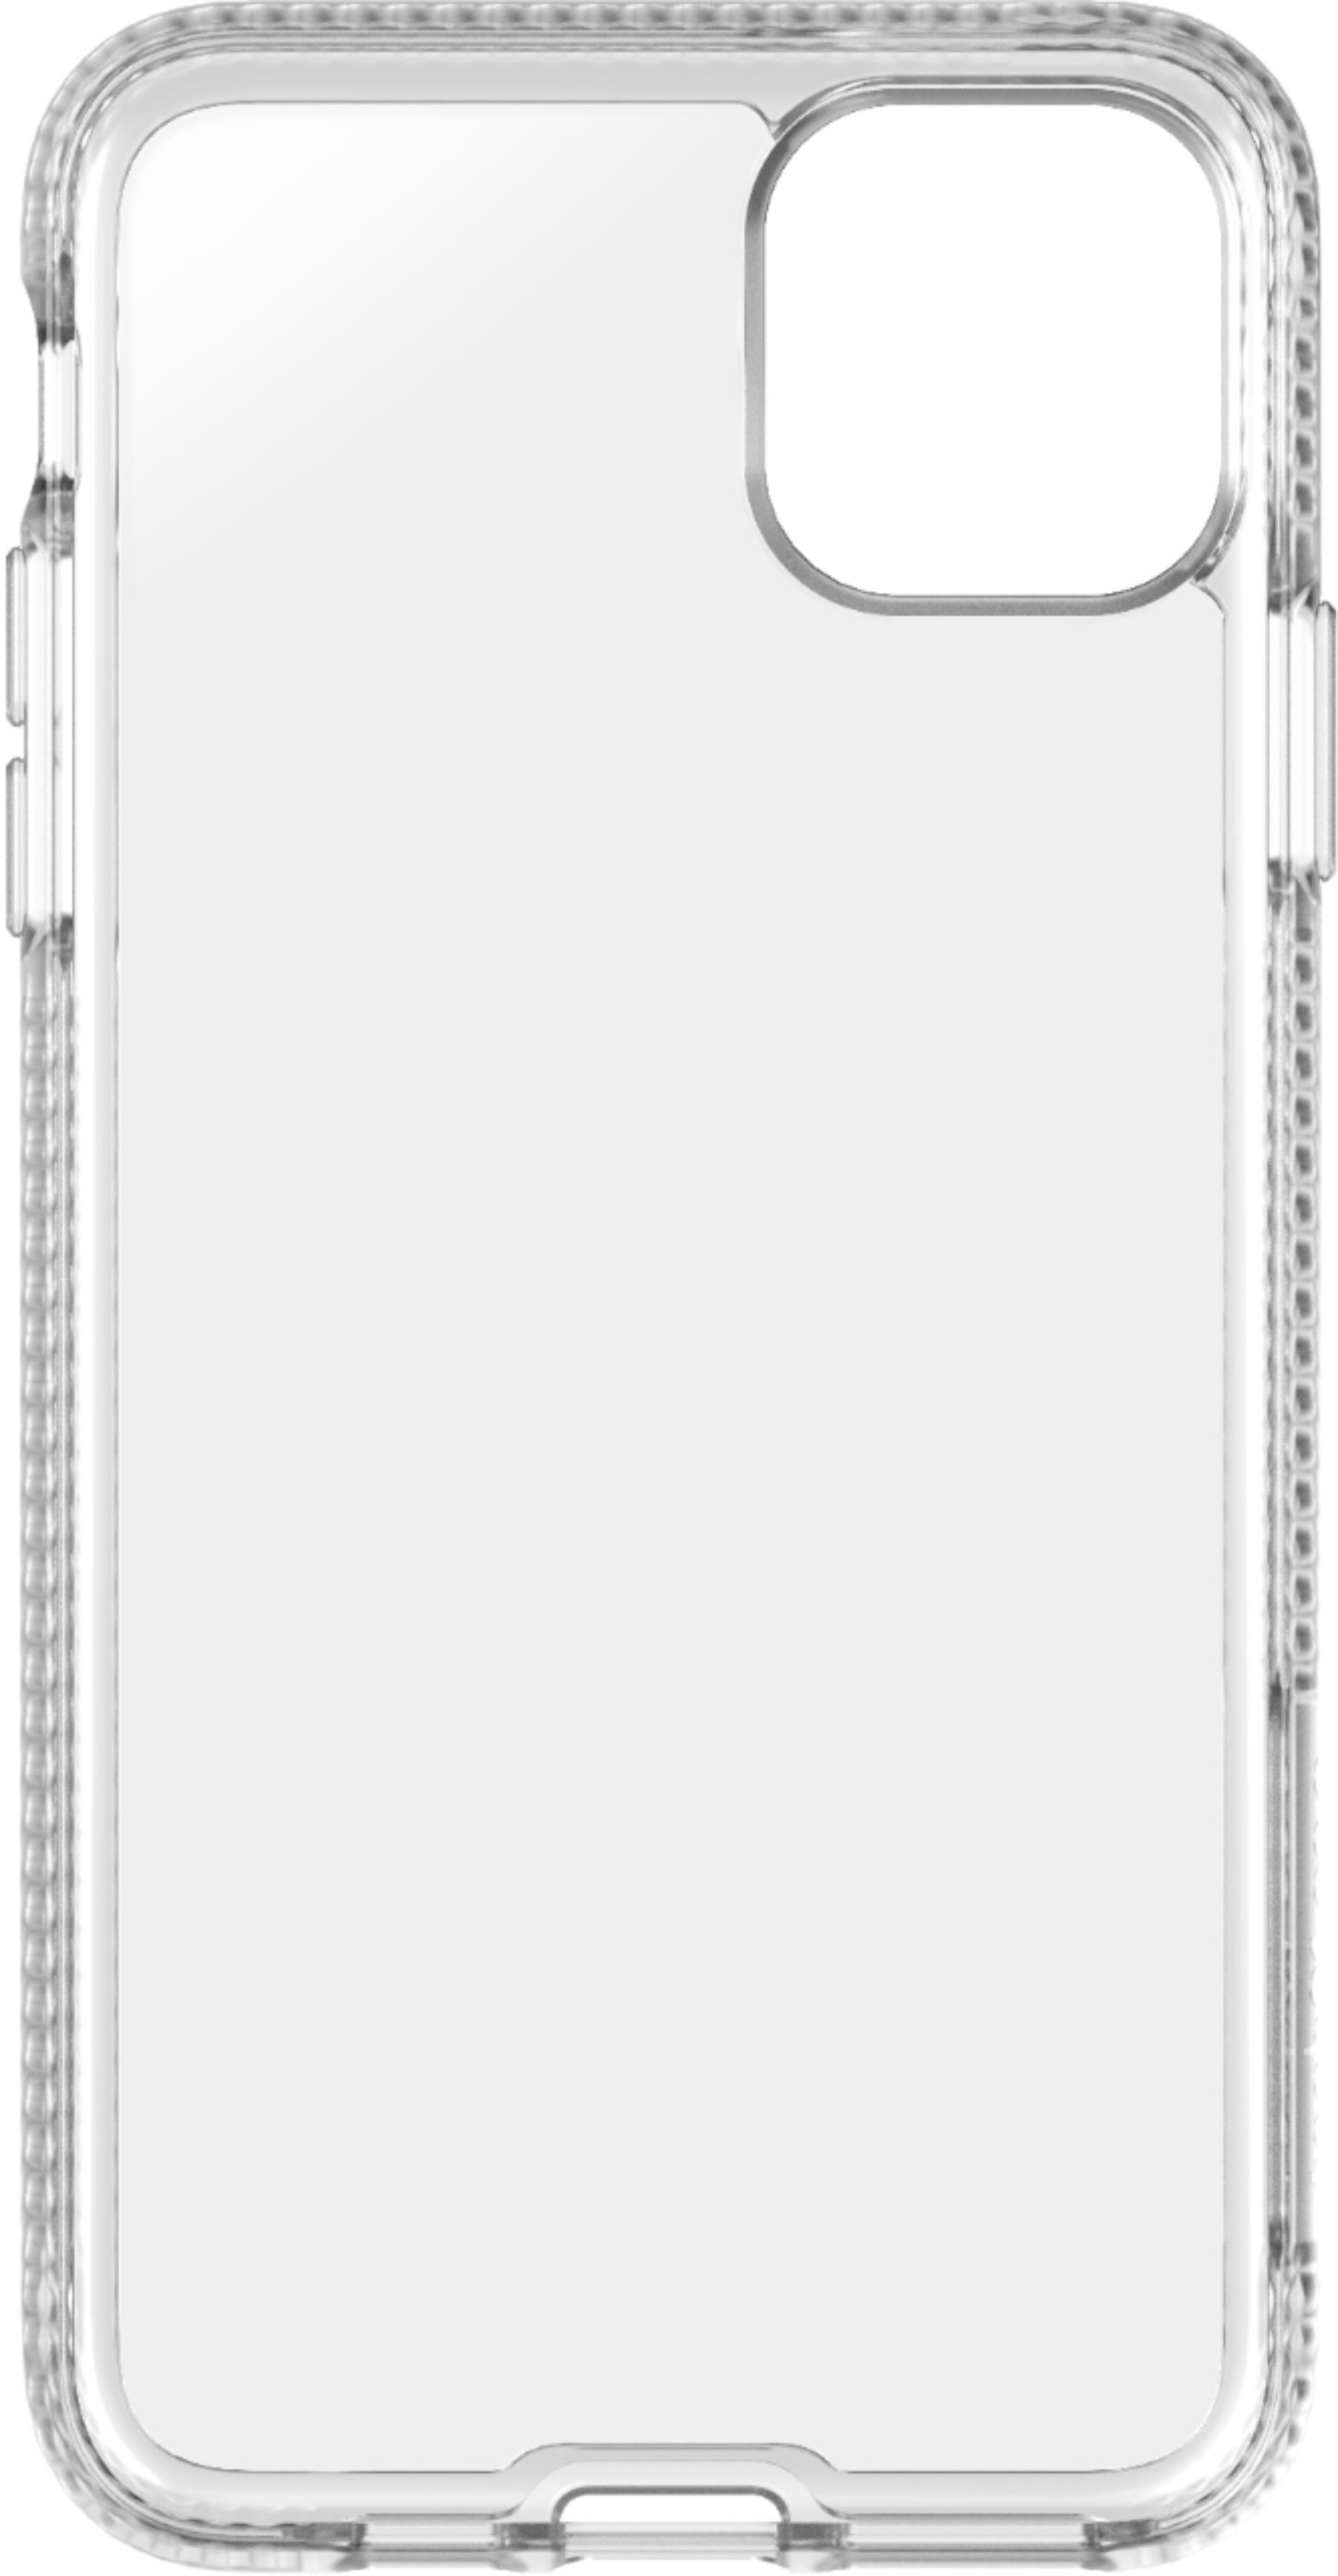 Tech21 Pure Clear Case For Apple Iphone 11 Pro Max Clear bbr Best Buy